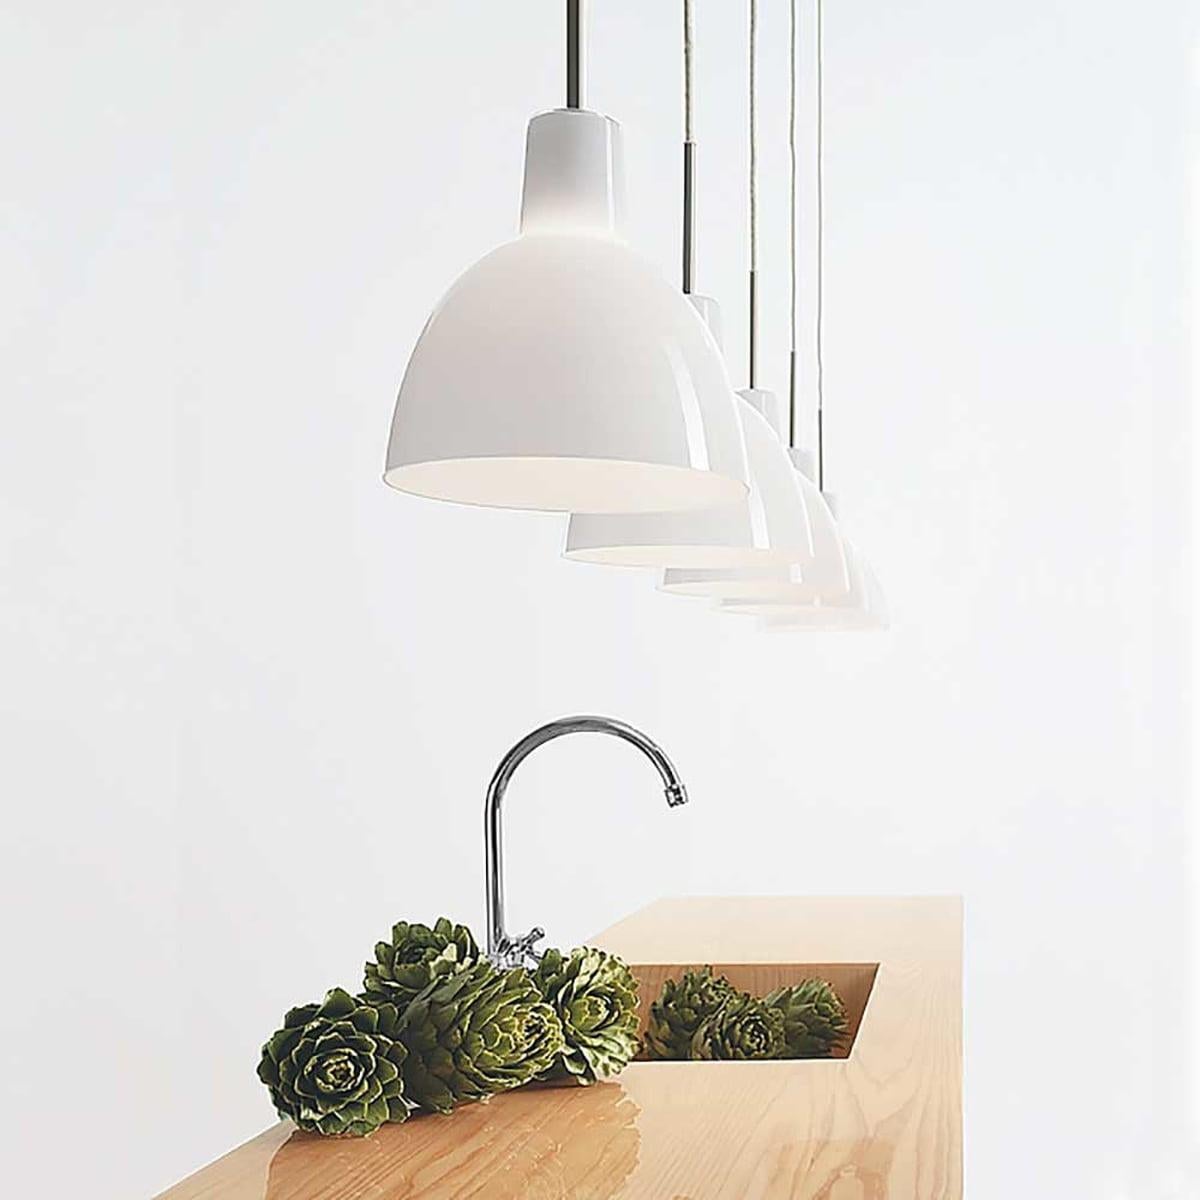 Glass pendant 220 light by Louis Poulsen
Measures: Width 220 x height 275 x length 220 (mm), 1.5 kg

Material: Mouth-blown white opal glass, pendant fitting in brushed stainless steel. Canopy: Yes Cord length: 3 m Cord type: White fabric